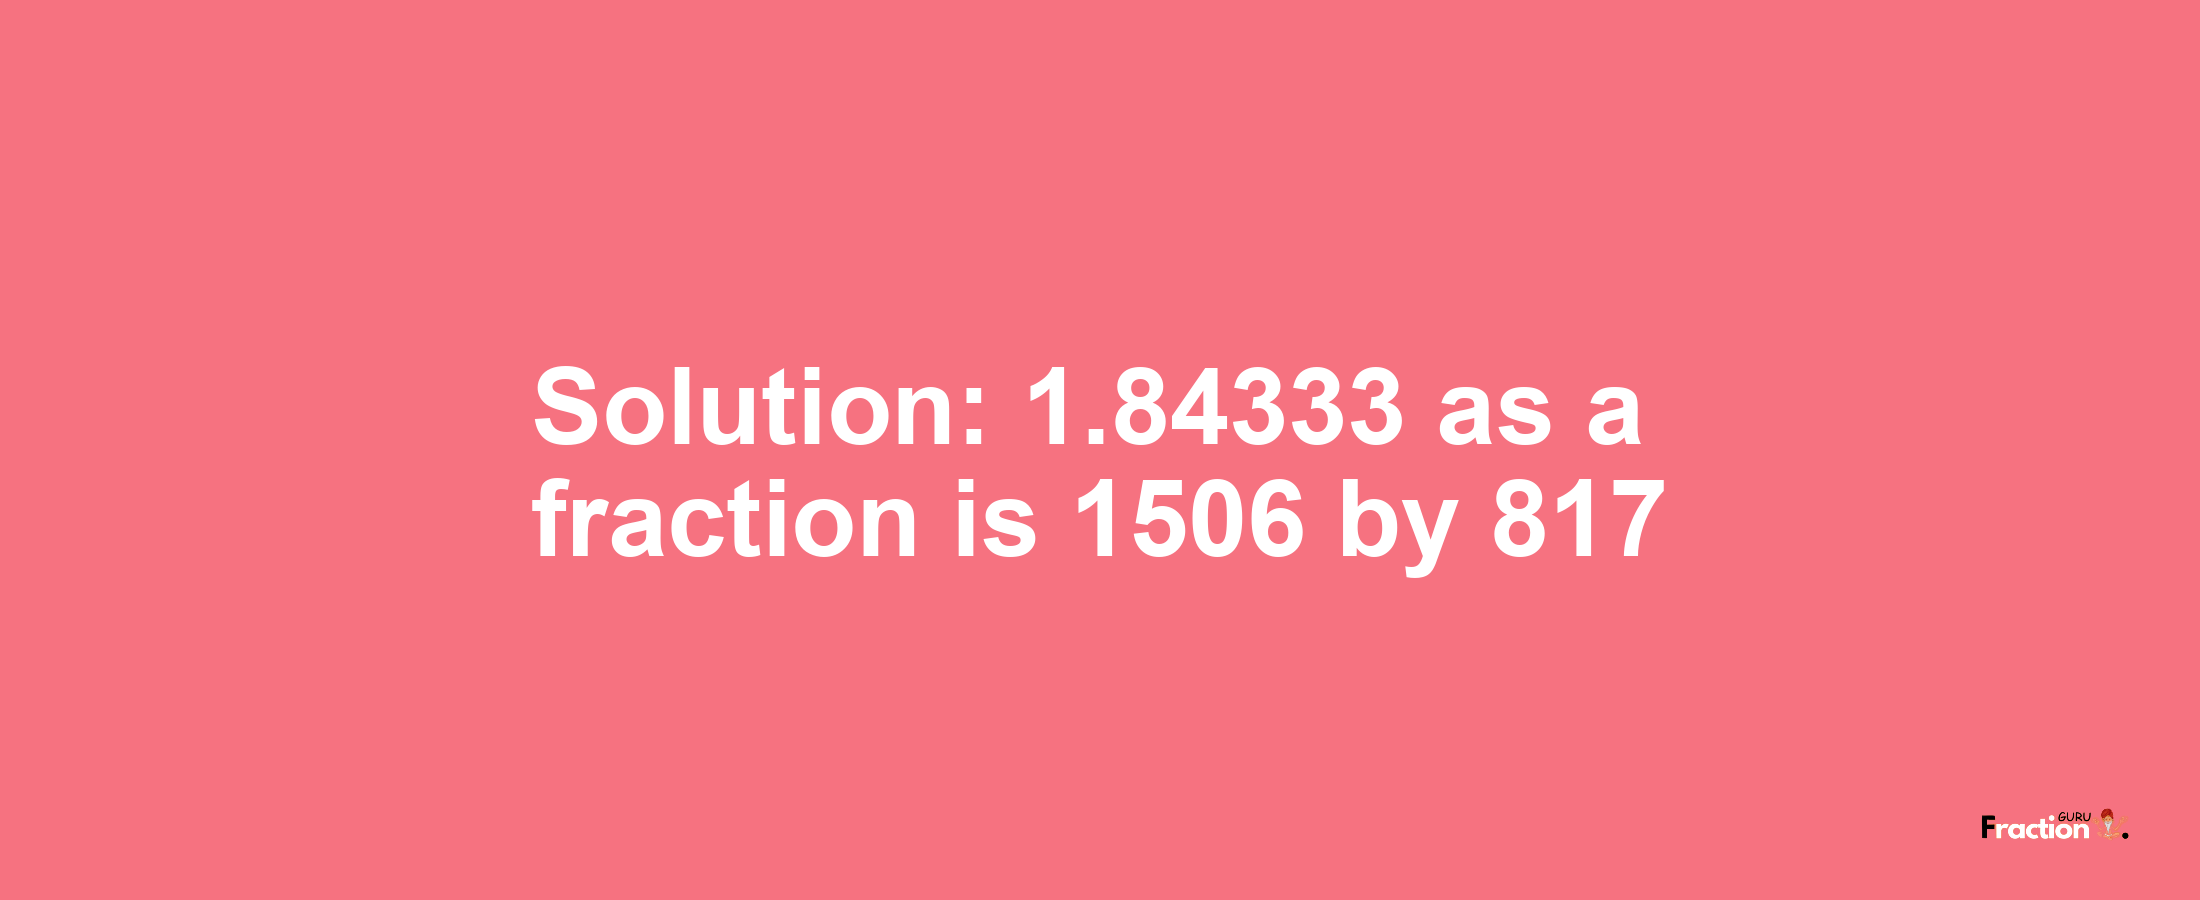 Solution:1.84333 as a fraction is 1506/817